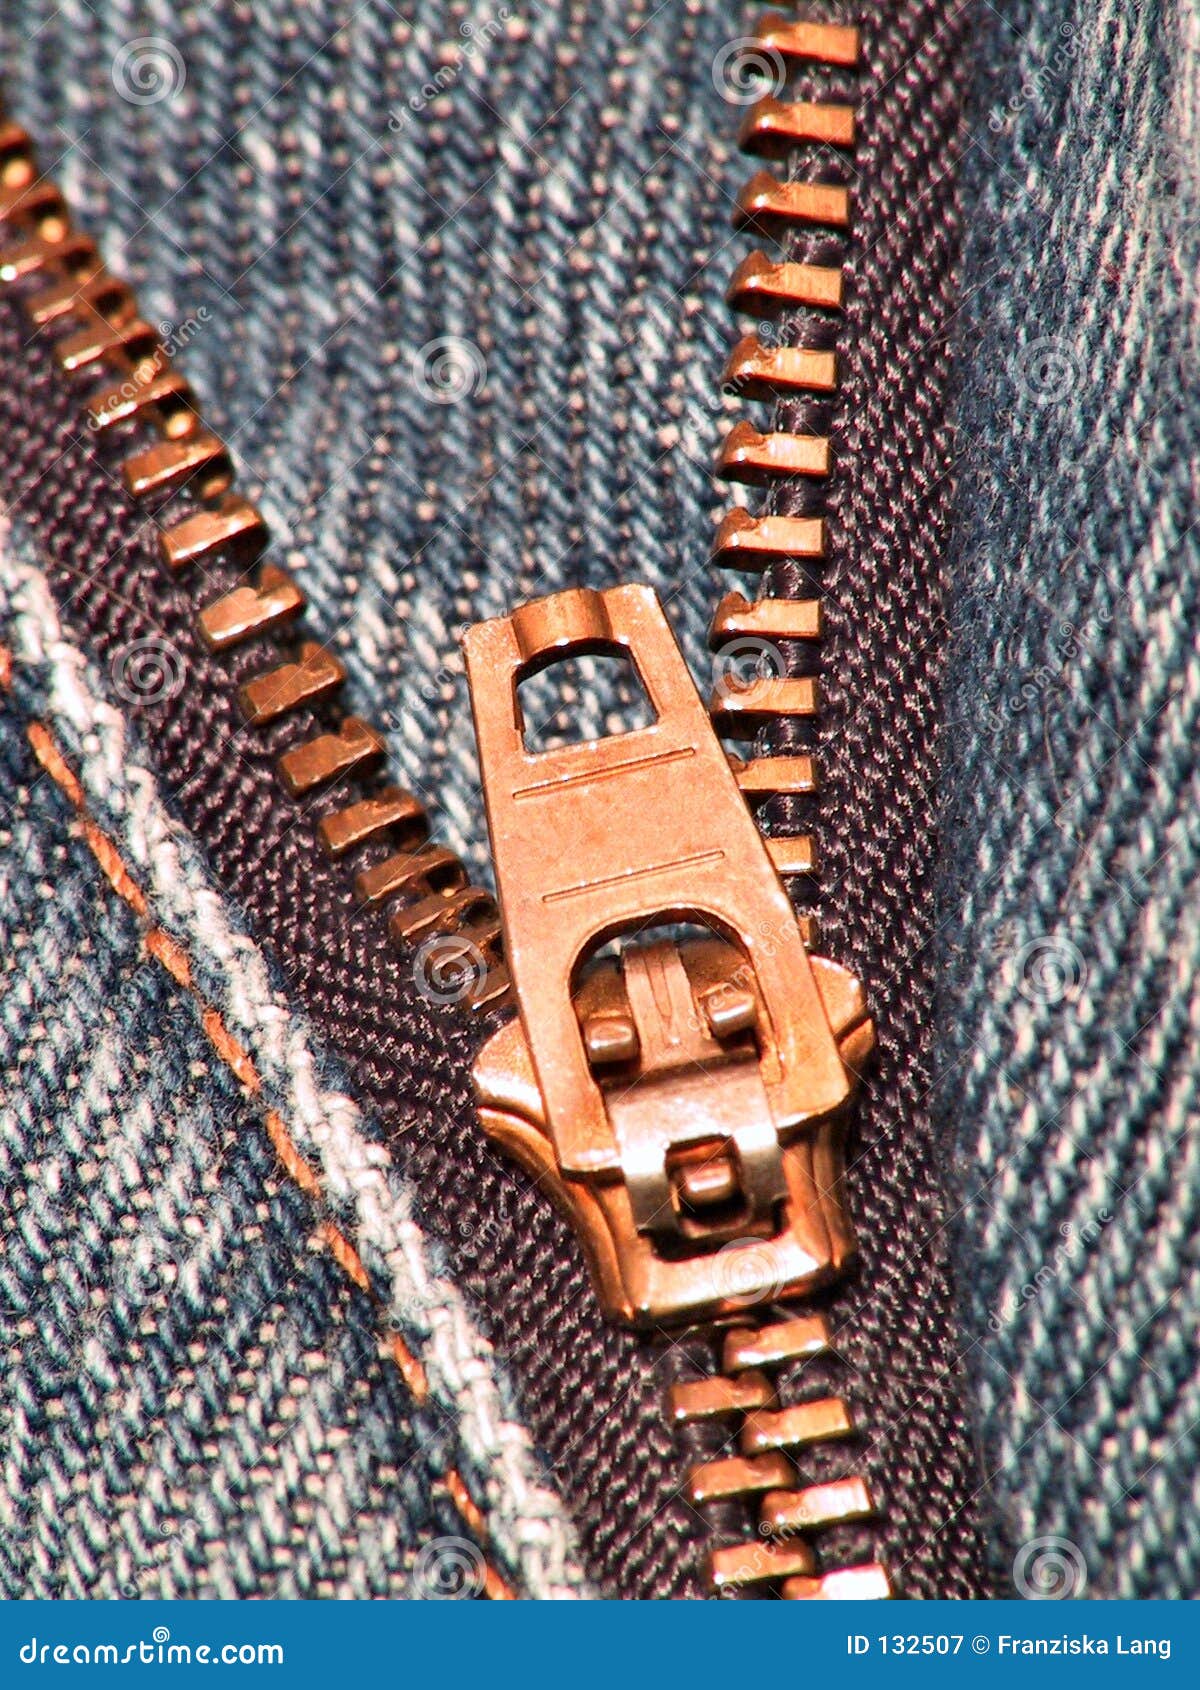 Zipper (jeans / Close-up) Royalty Free Stock Photography - Image: 132507